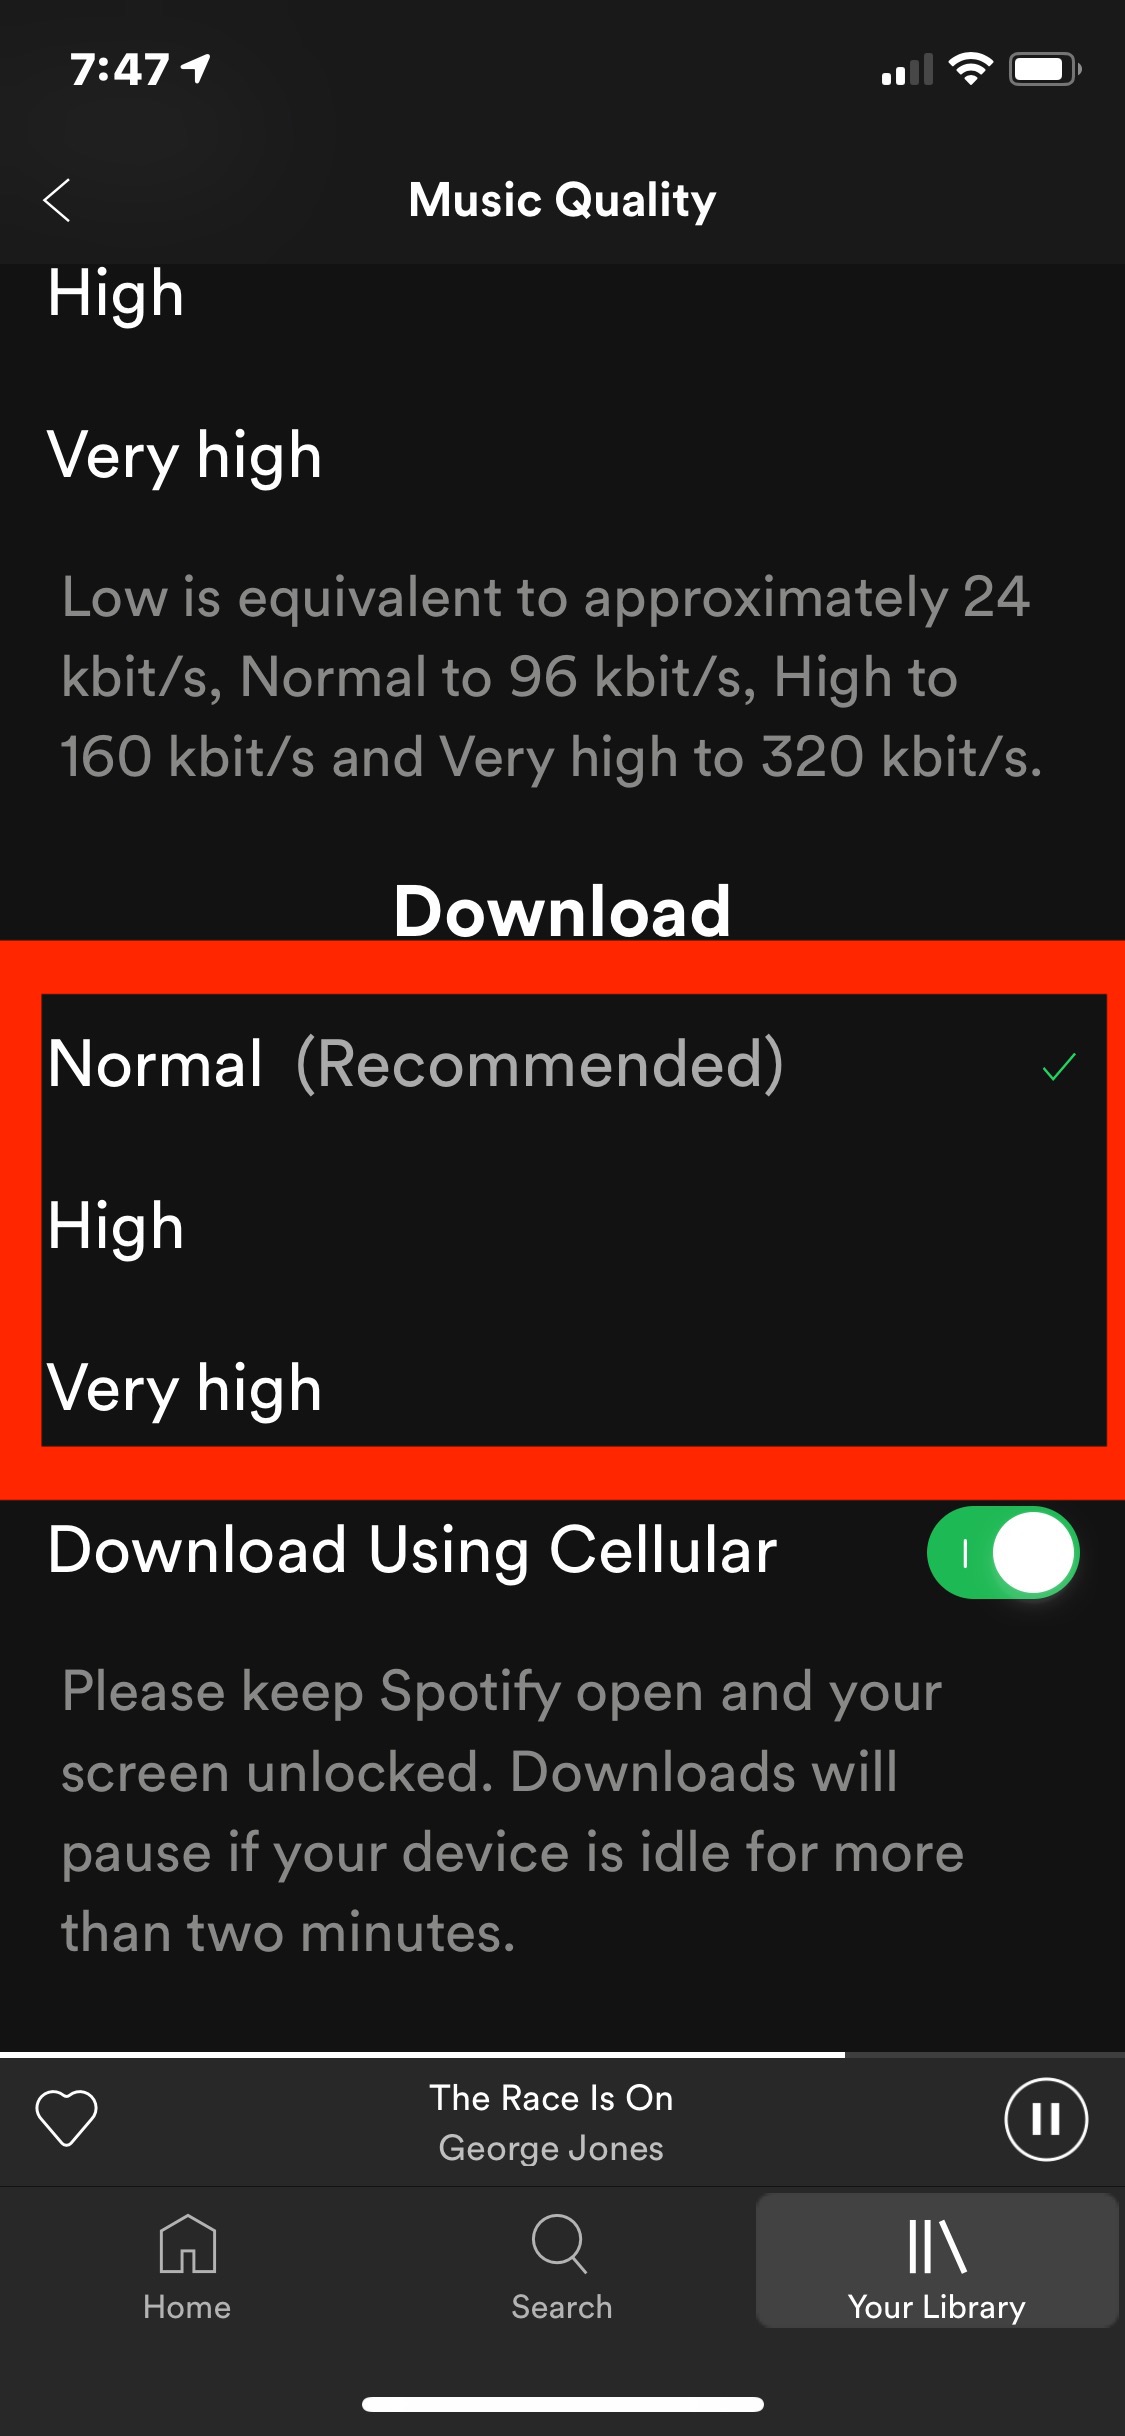 Download Spotify Songs Does It Take Up Space